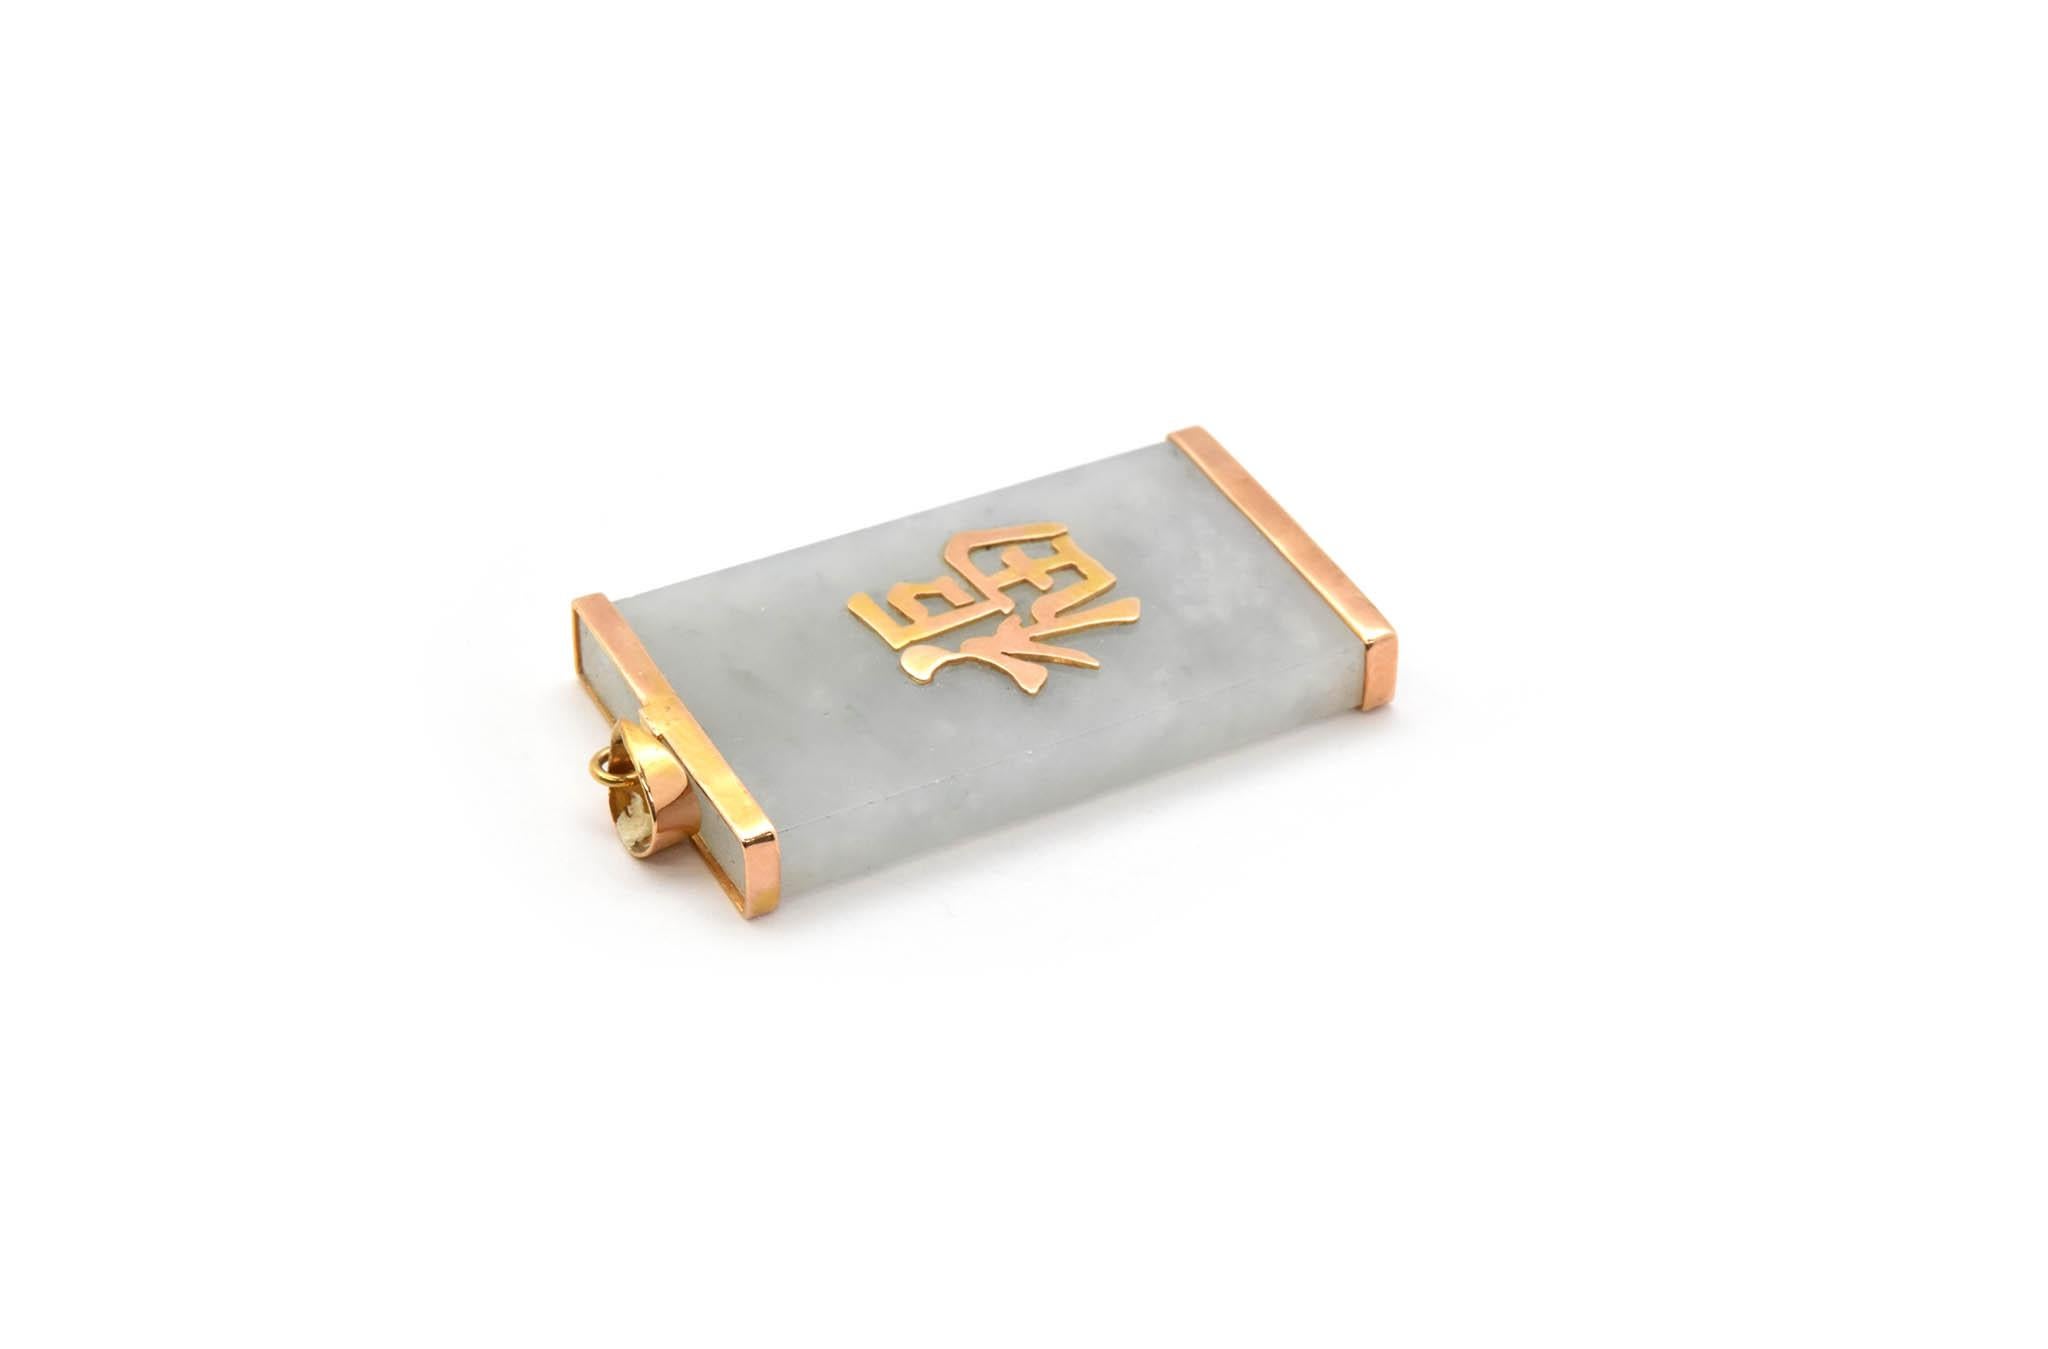 This pendant features a piece of jade accented in 14k yellow gold. The jade features a Chinese character on the front of it. The pendant measures 21x37mm, and it weighs 11.28 grams.

